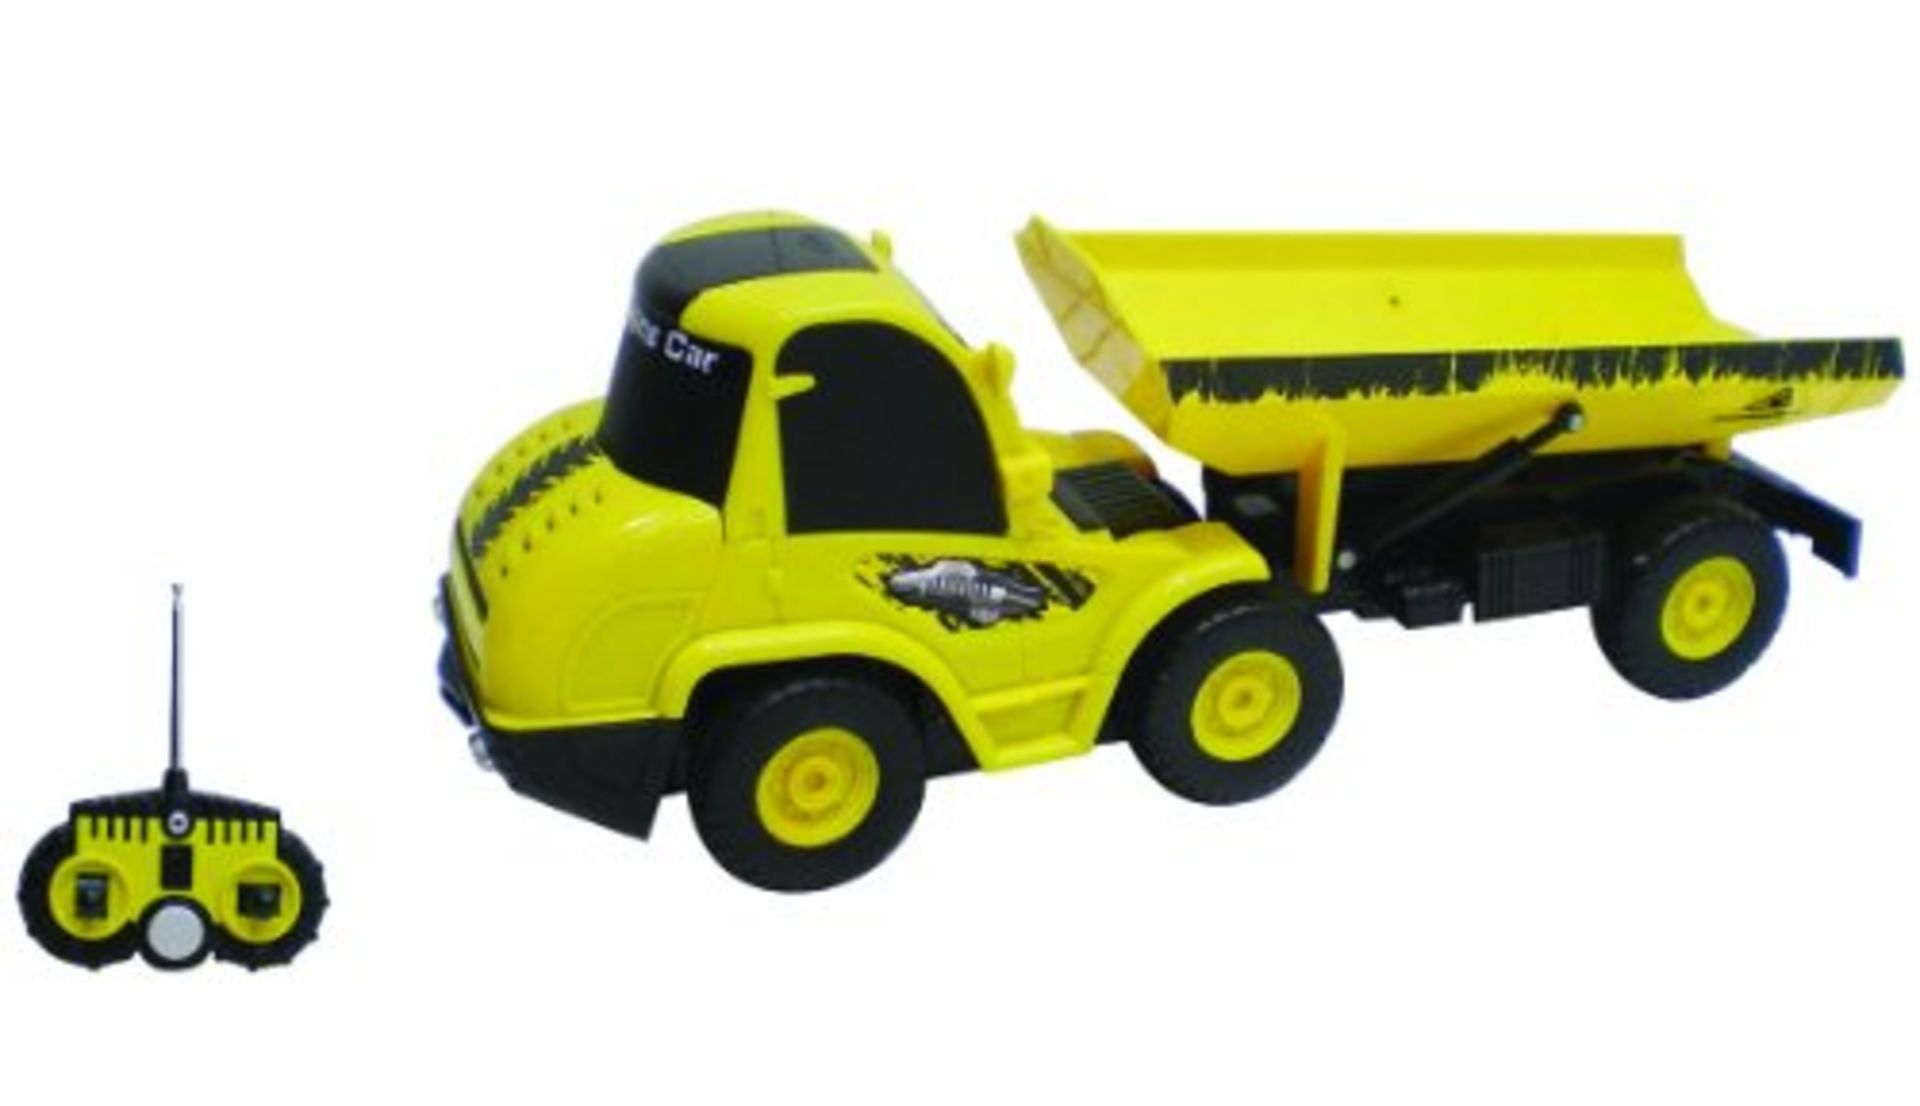 V Brand New 1:20 Remote Control Construction Tipper Vehicle X 2 YOUR BID PRICE TO BE MULTIPLIED BY